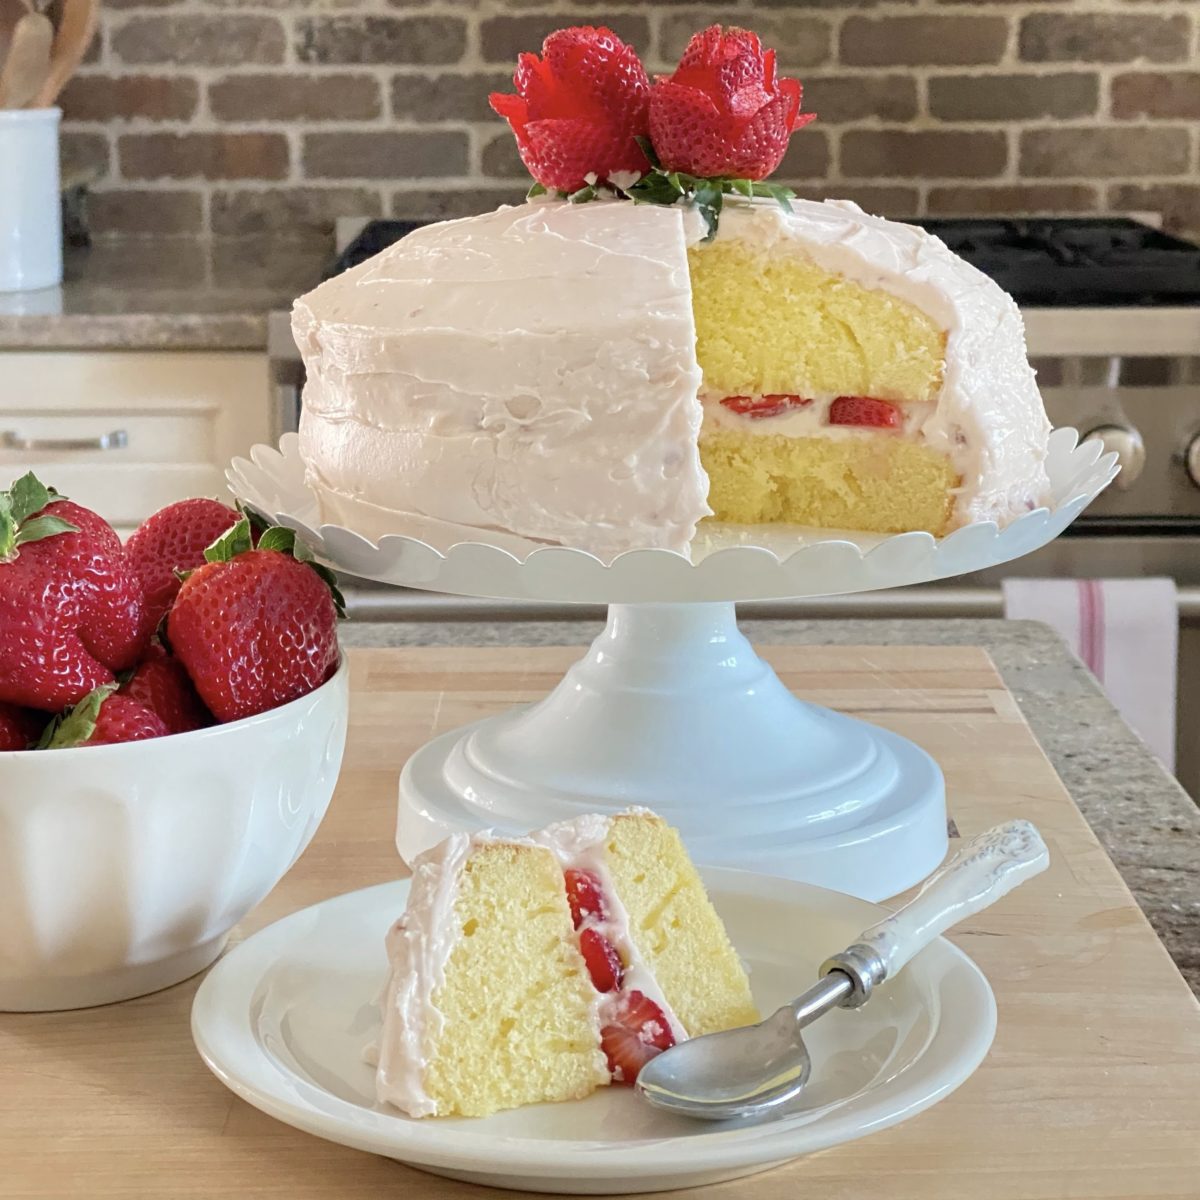 The best vanilla strawberry cake on a cake stand with a slice out of it on a plate below and a bowl of strawberries beside them.